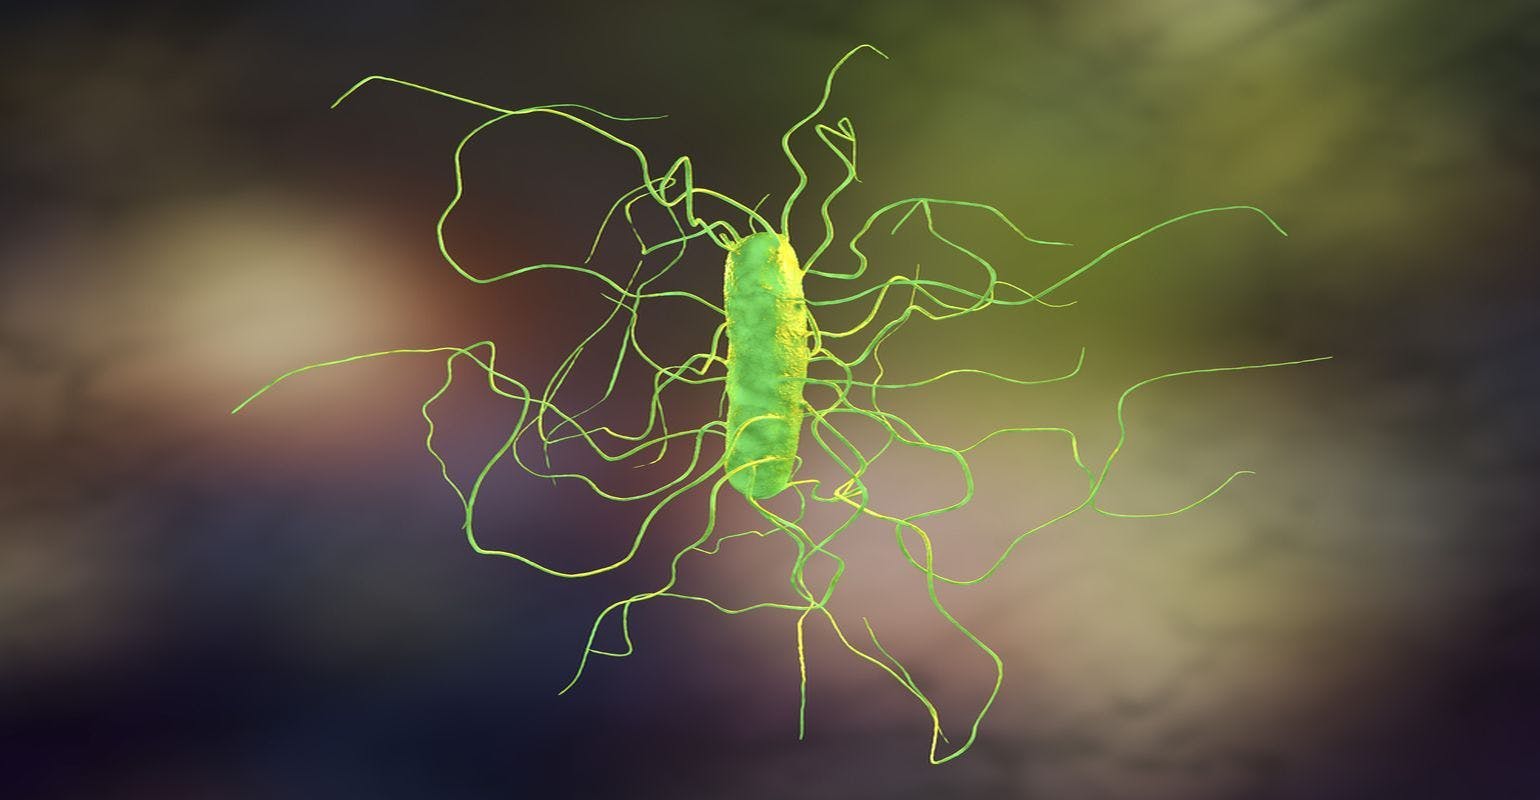 Common Pain Relievers May Promote Clostridium difficile Infections